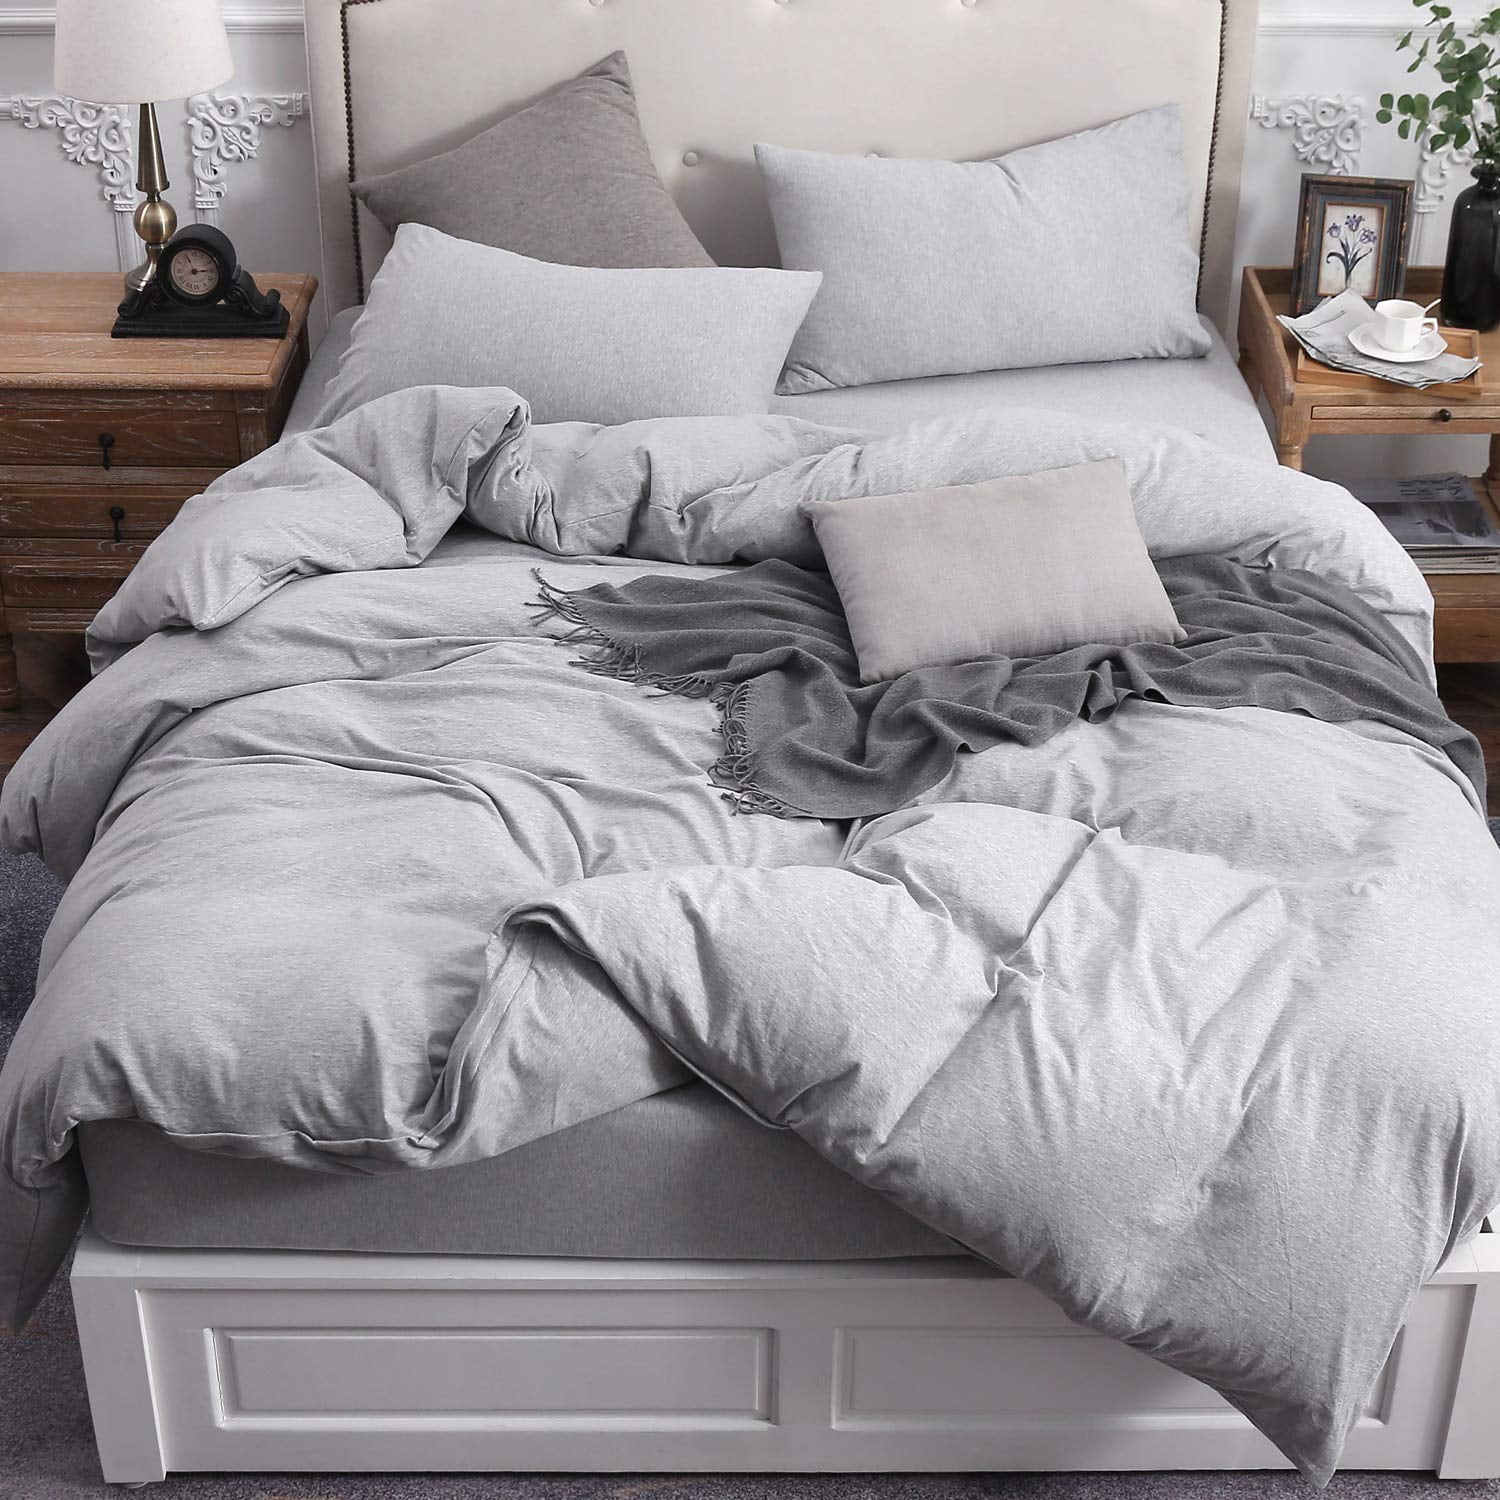 PURE ERA Duvet Cover Set - Ultra Soft Heather Jersey Knit Cotton Home  Bedding Solid Gray Twin Size, 1 Comforter Cover and 1 Pillow Sham